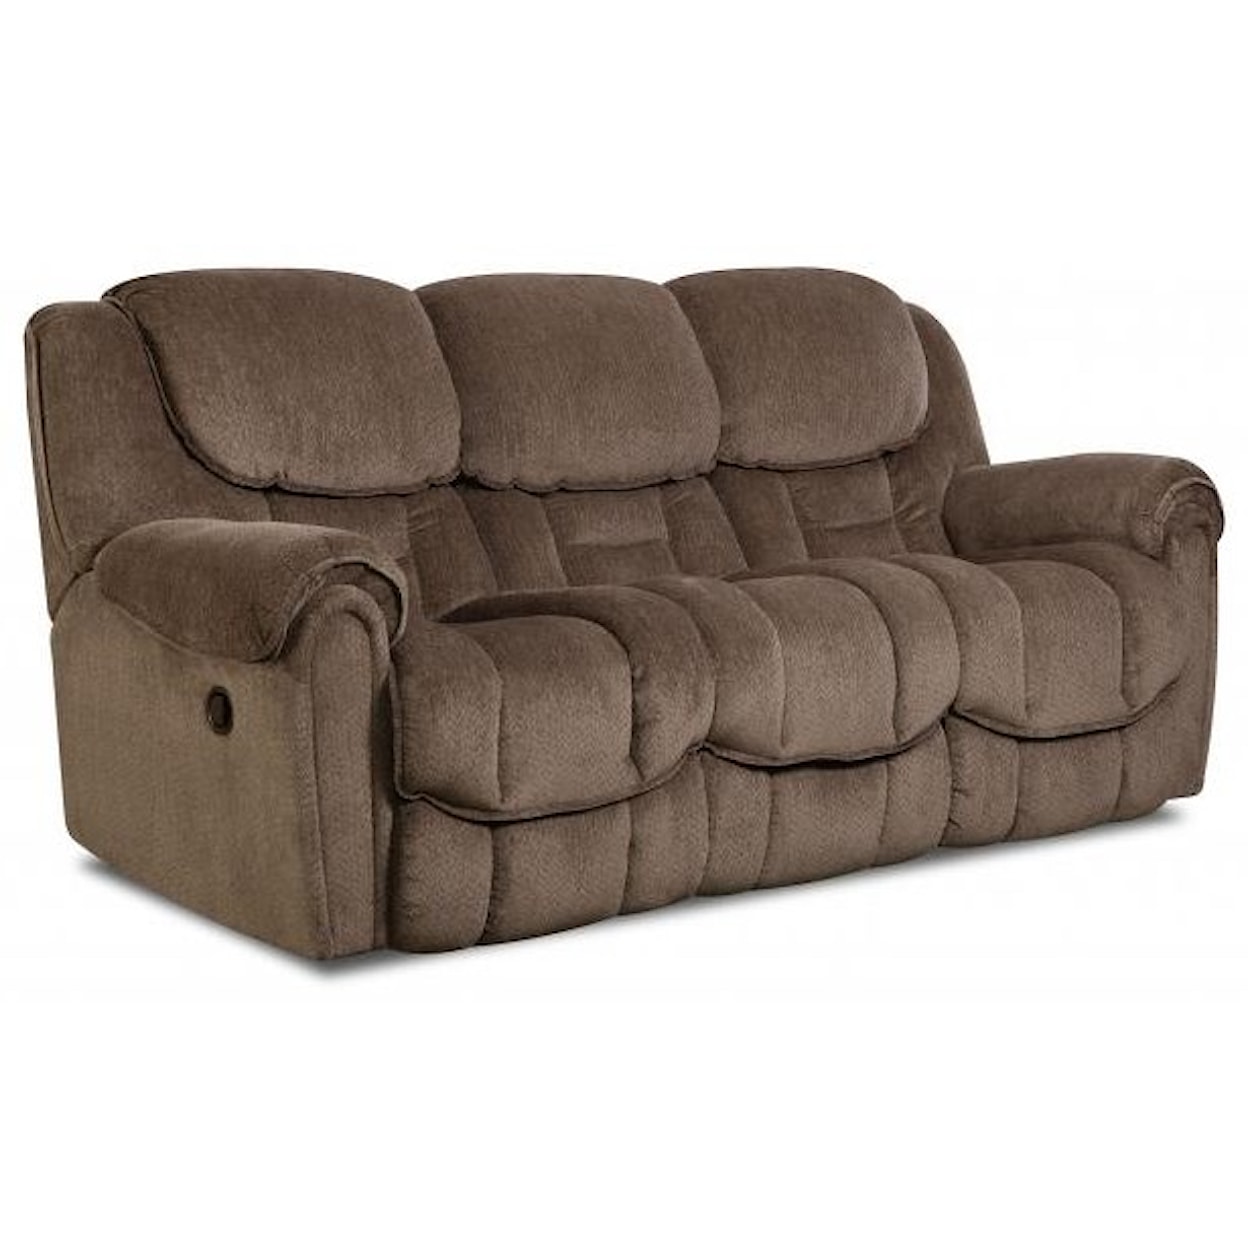 HomeStretch 122 OLD Casual Reclining Sofa